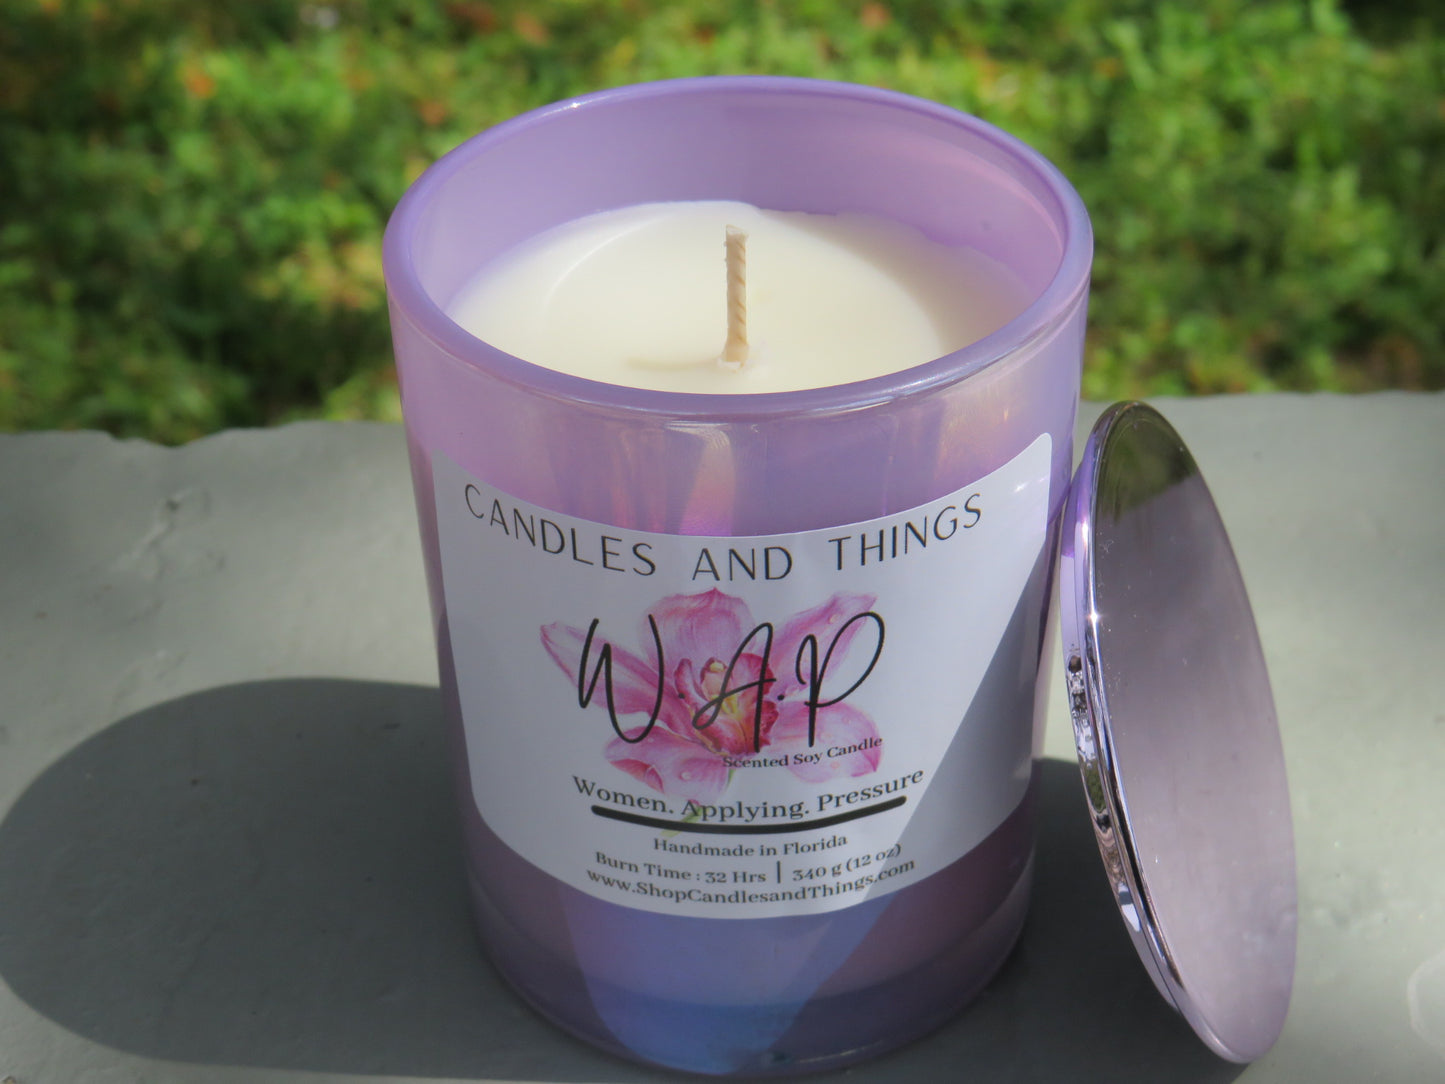 W.A.P Inspired Scented Candle Women.Applying.Pressure |Handmade Candle | Gift Sets